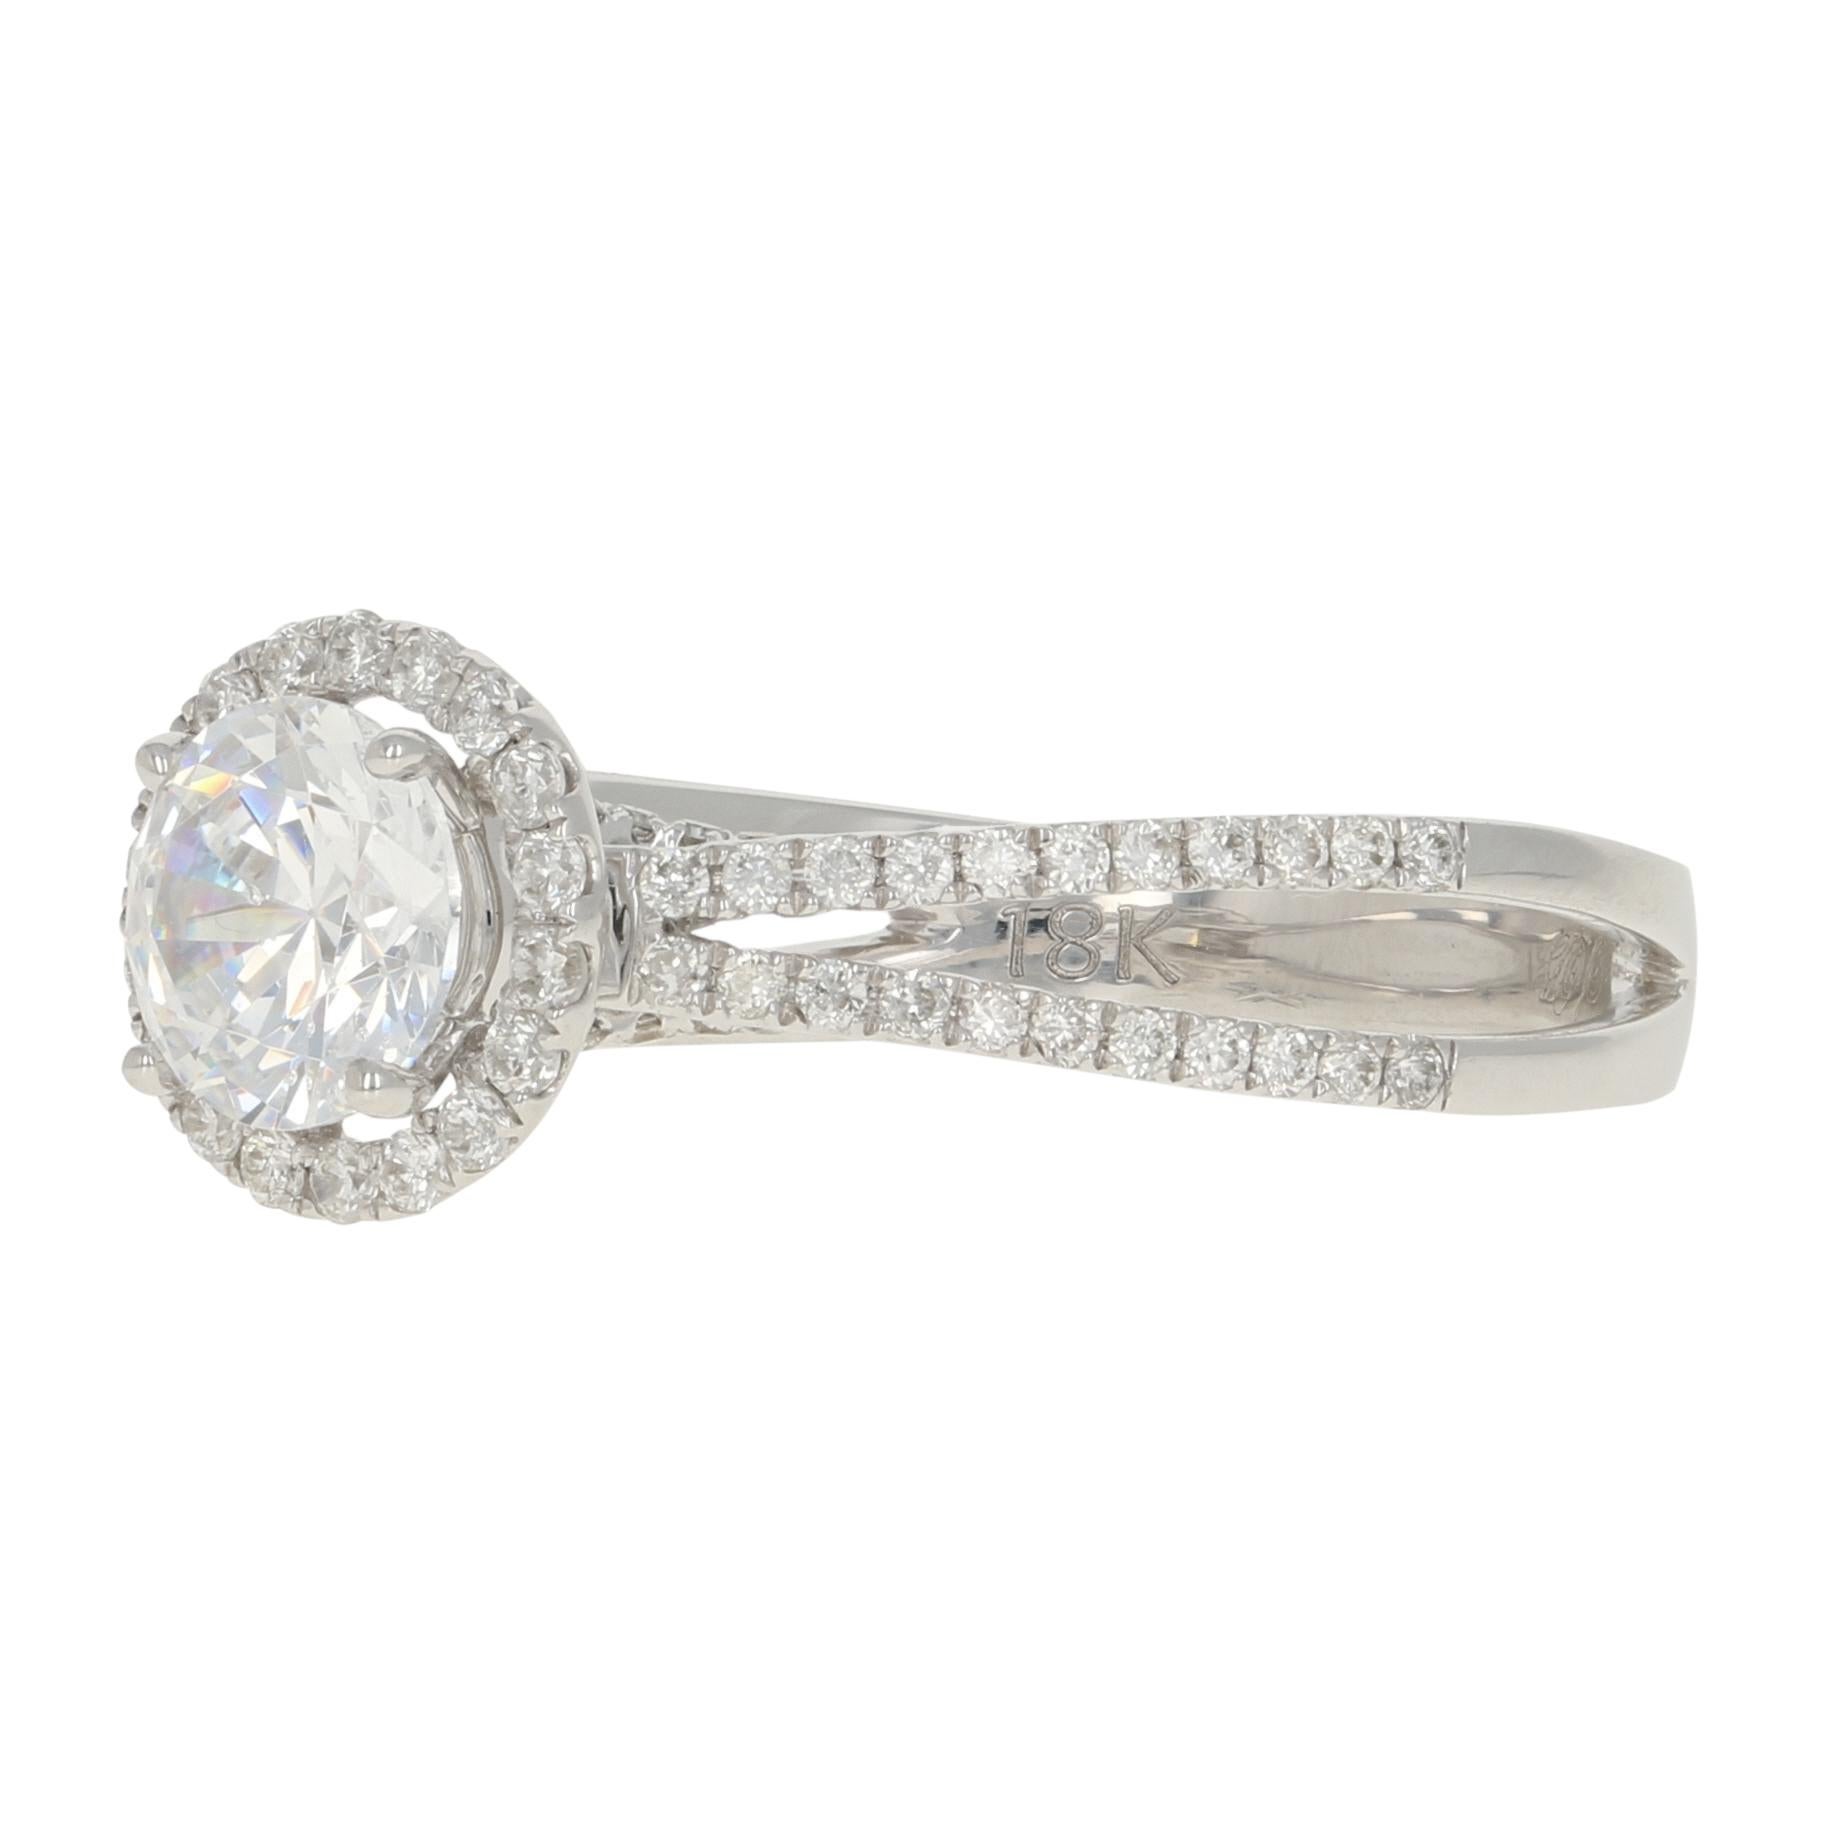 Composed of 18k white gold, this breathtaking NEW semi-mount engagement ring showcases a cubic zirconia set as a placeholder for the 6mm - 6.5mm diamond or gemstone solitaire of your choosing. The solitaire is elegantly encircled by a sparkling